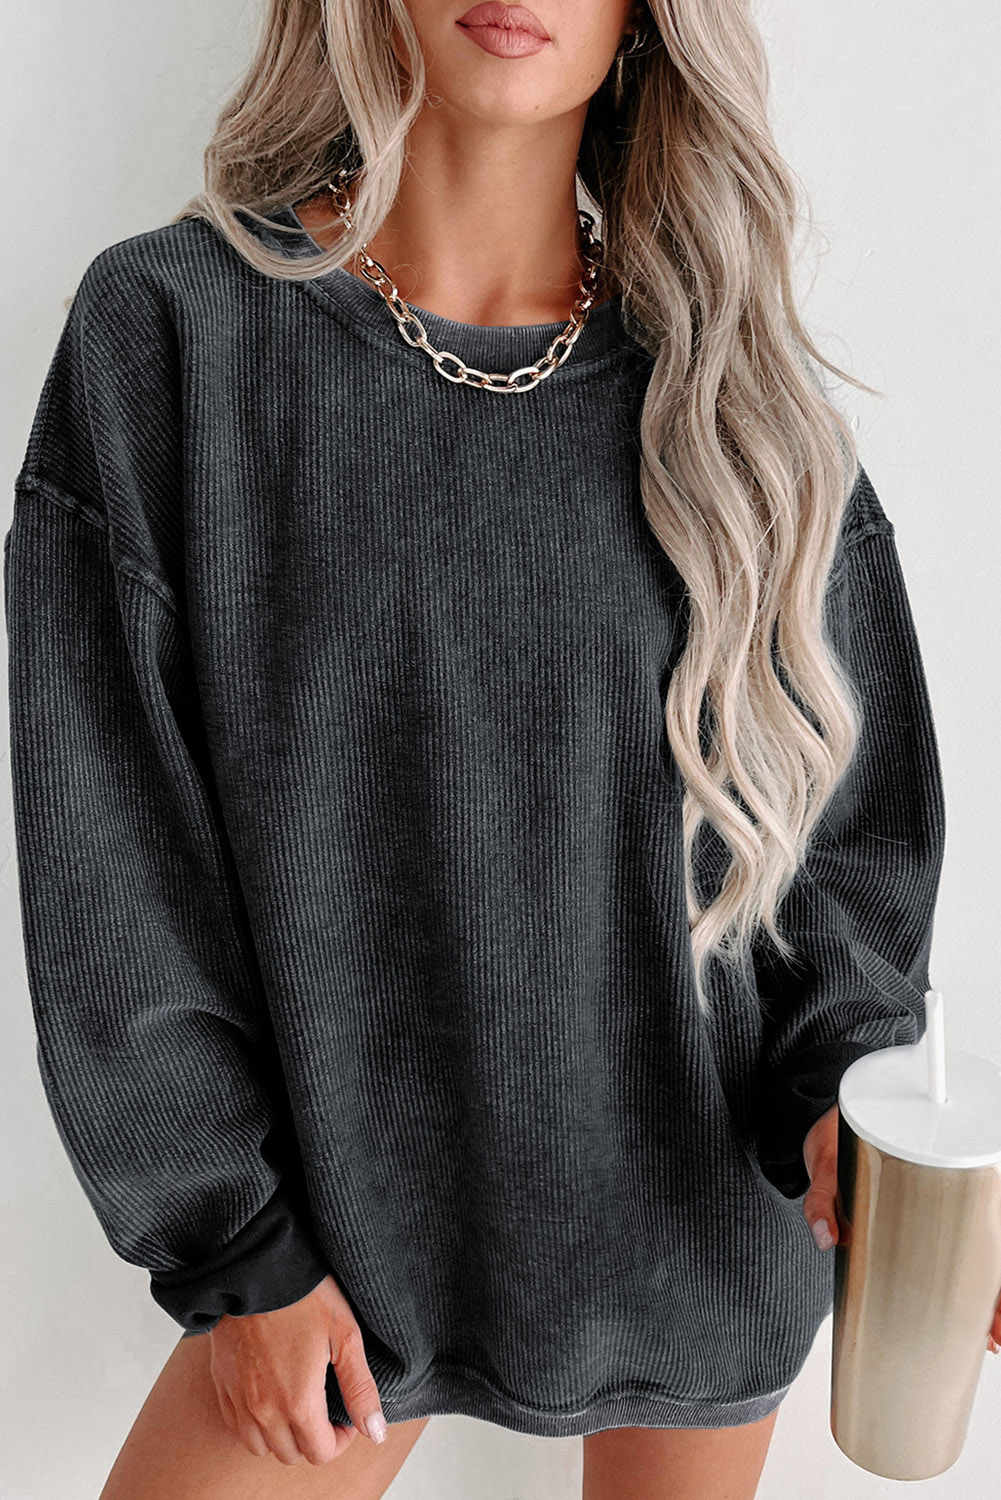 Shewin Wholesale Western Apparel Black Plain Ribbed Round Neck Pullover Sweatshirt